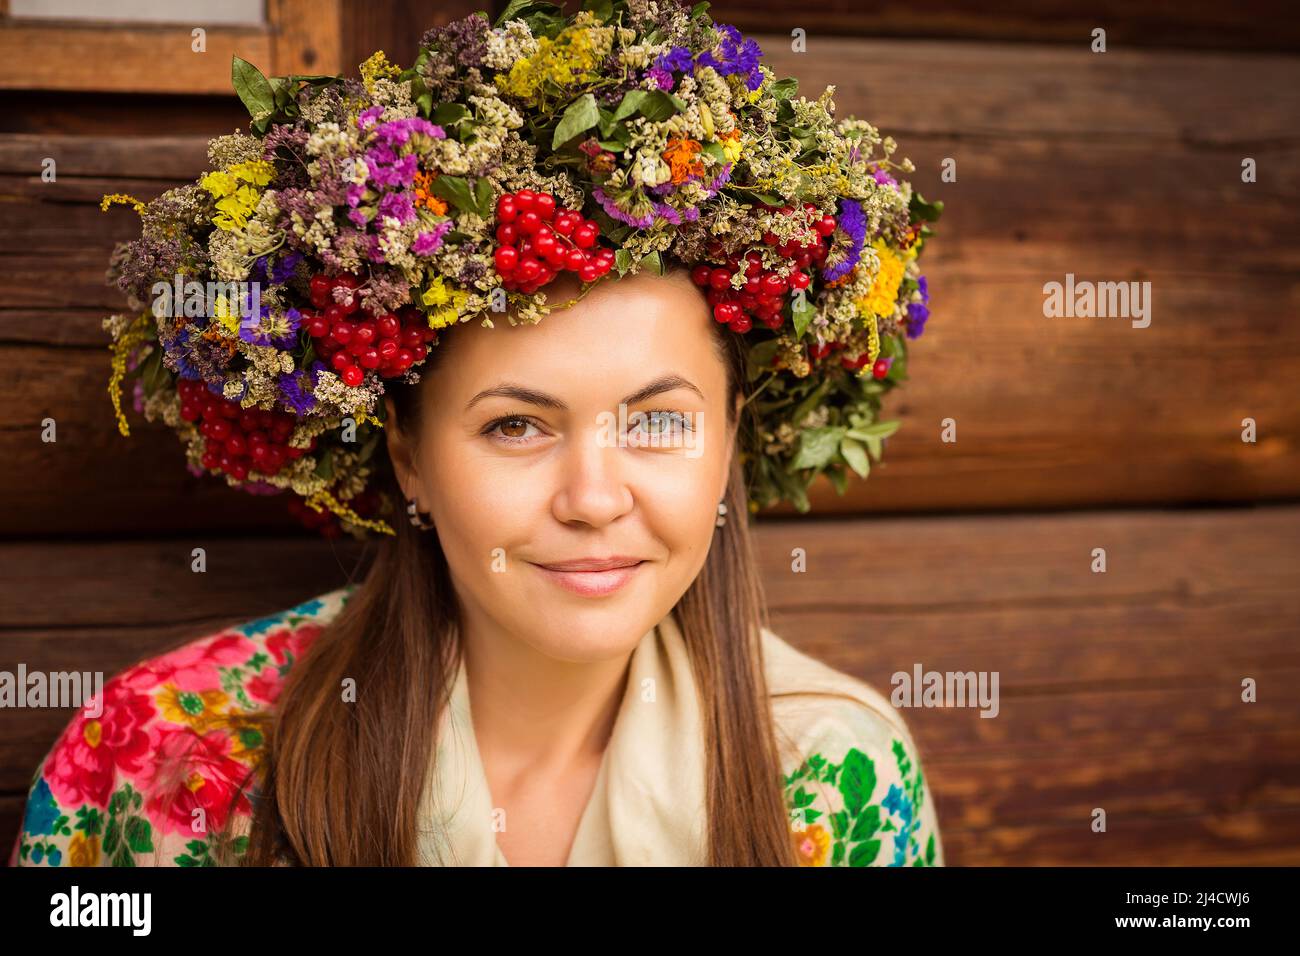 Young pretty ukrainian woman with a wreath of dry herbs on her head Stock Photo